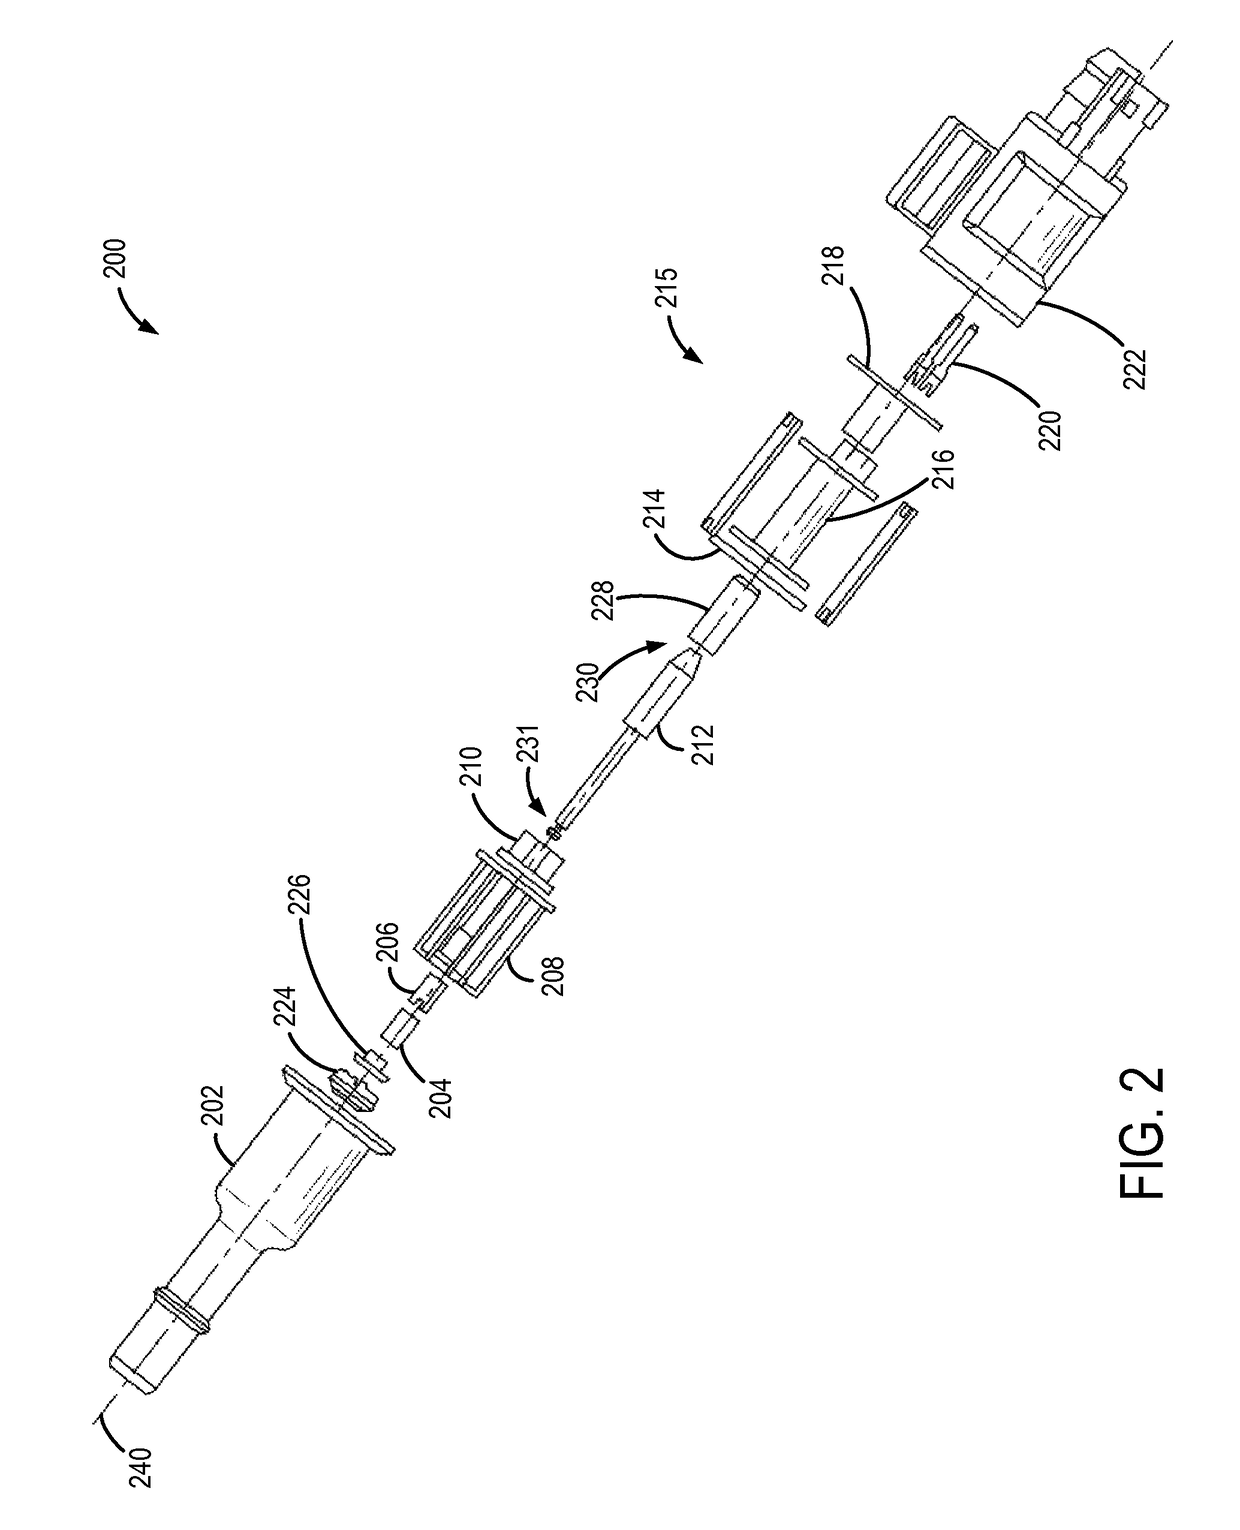 Latchable valve and method for operation of the latchable valve